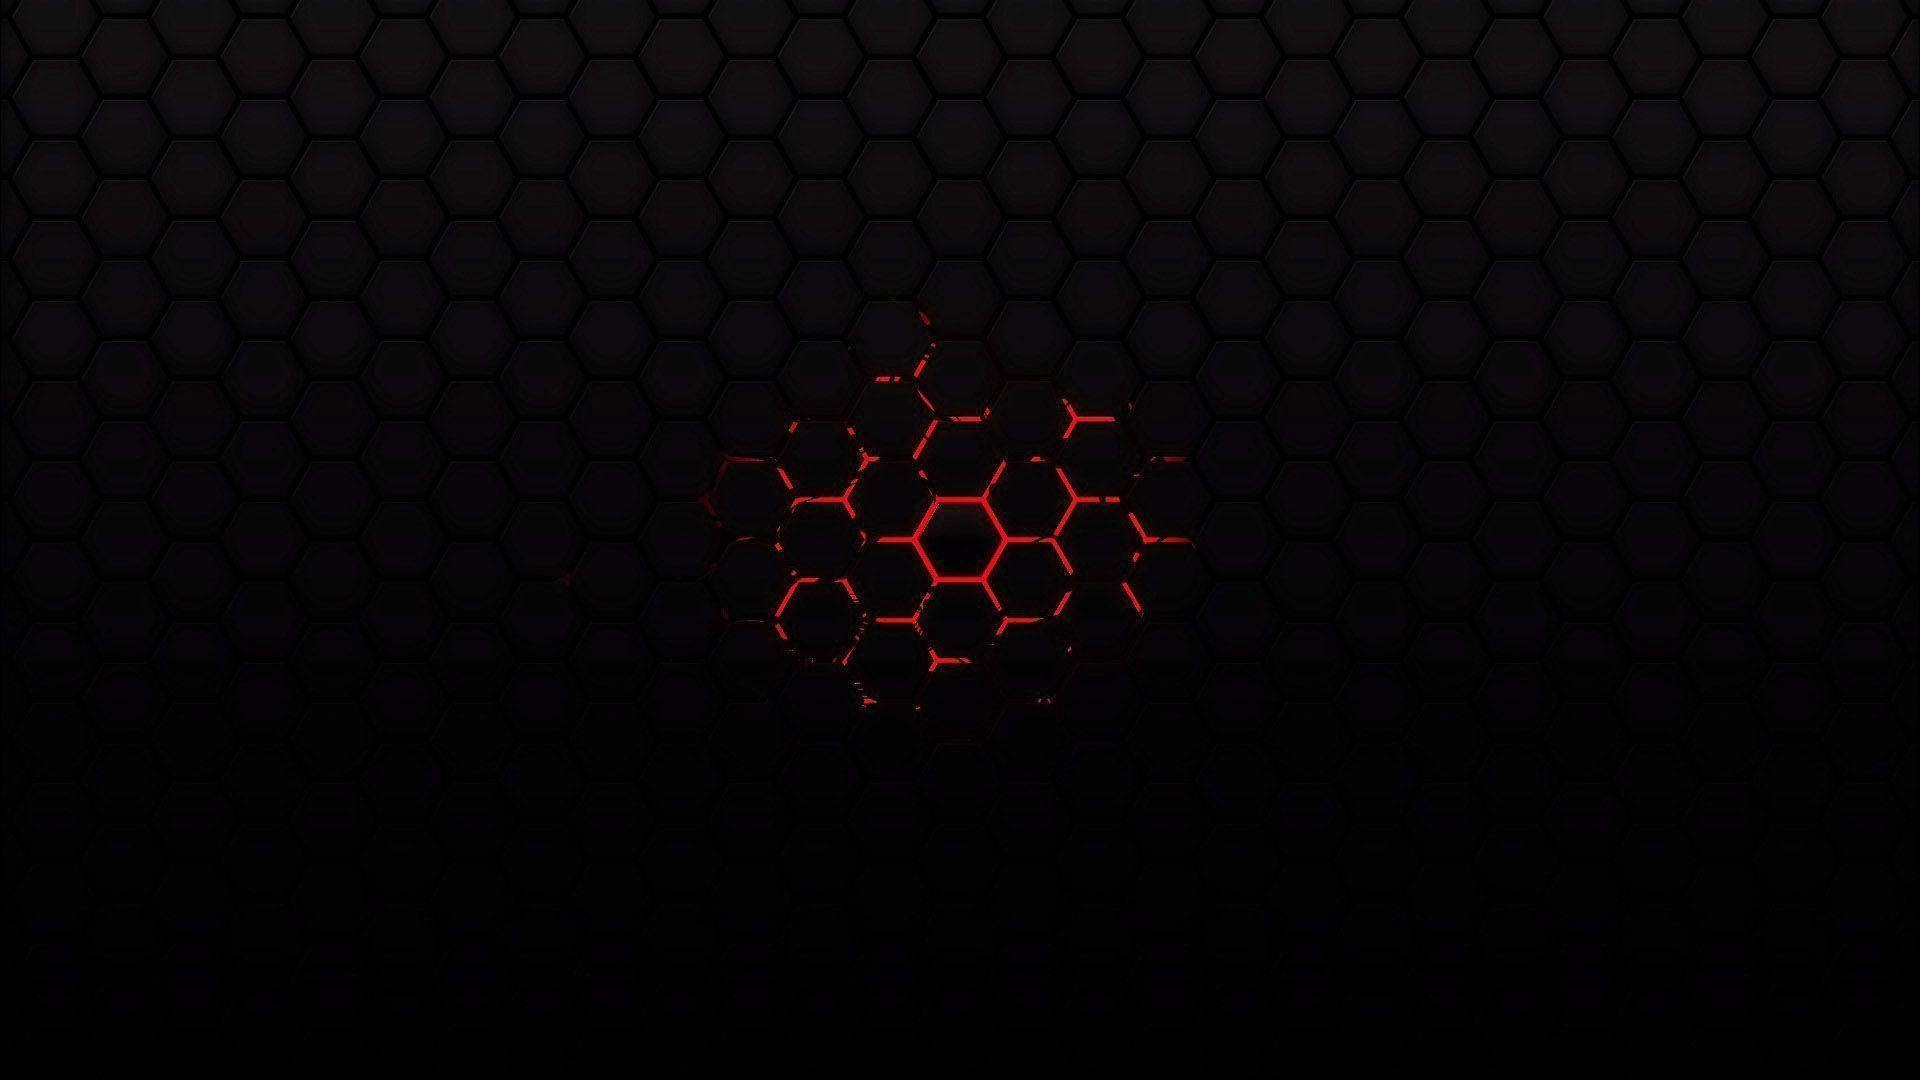 Solid Red and Black Hexagonal Pattern Wallpaper